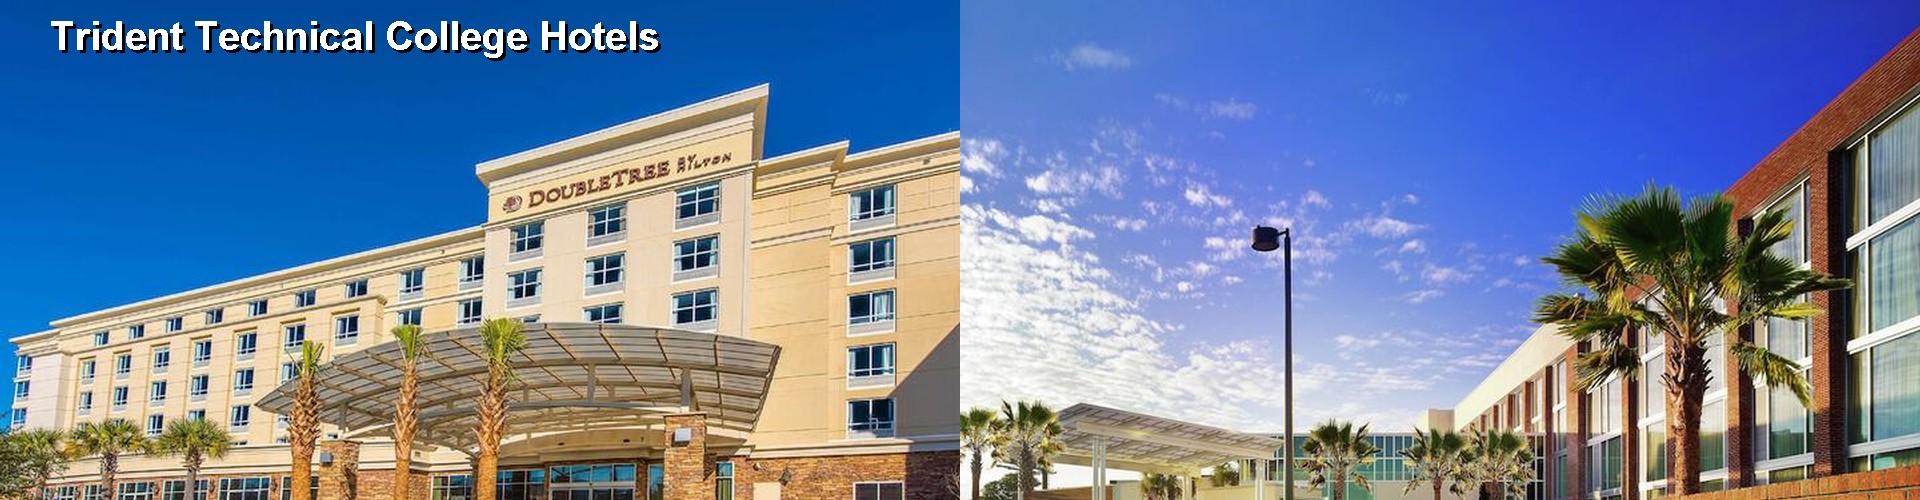 5 Best Hotels near Trident Technical College